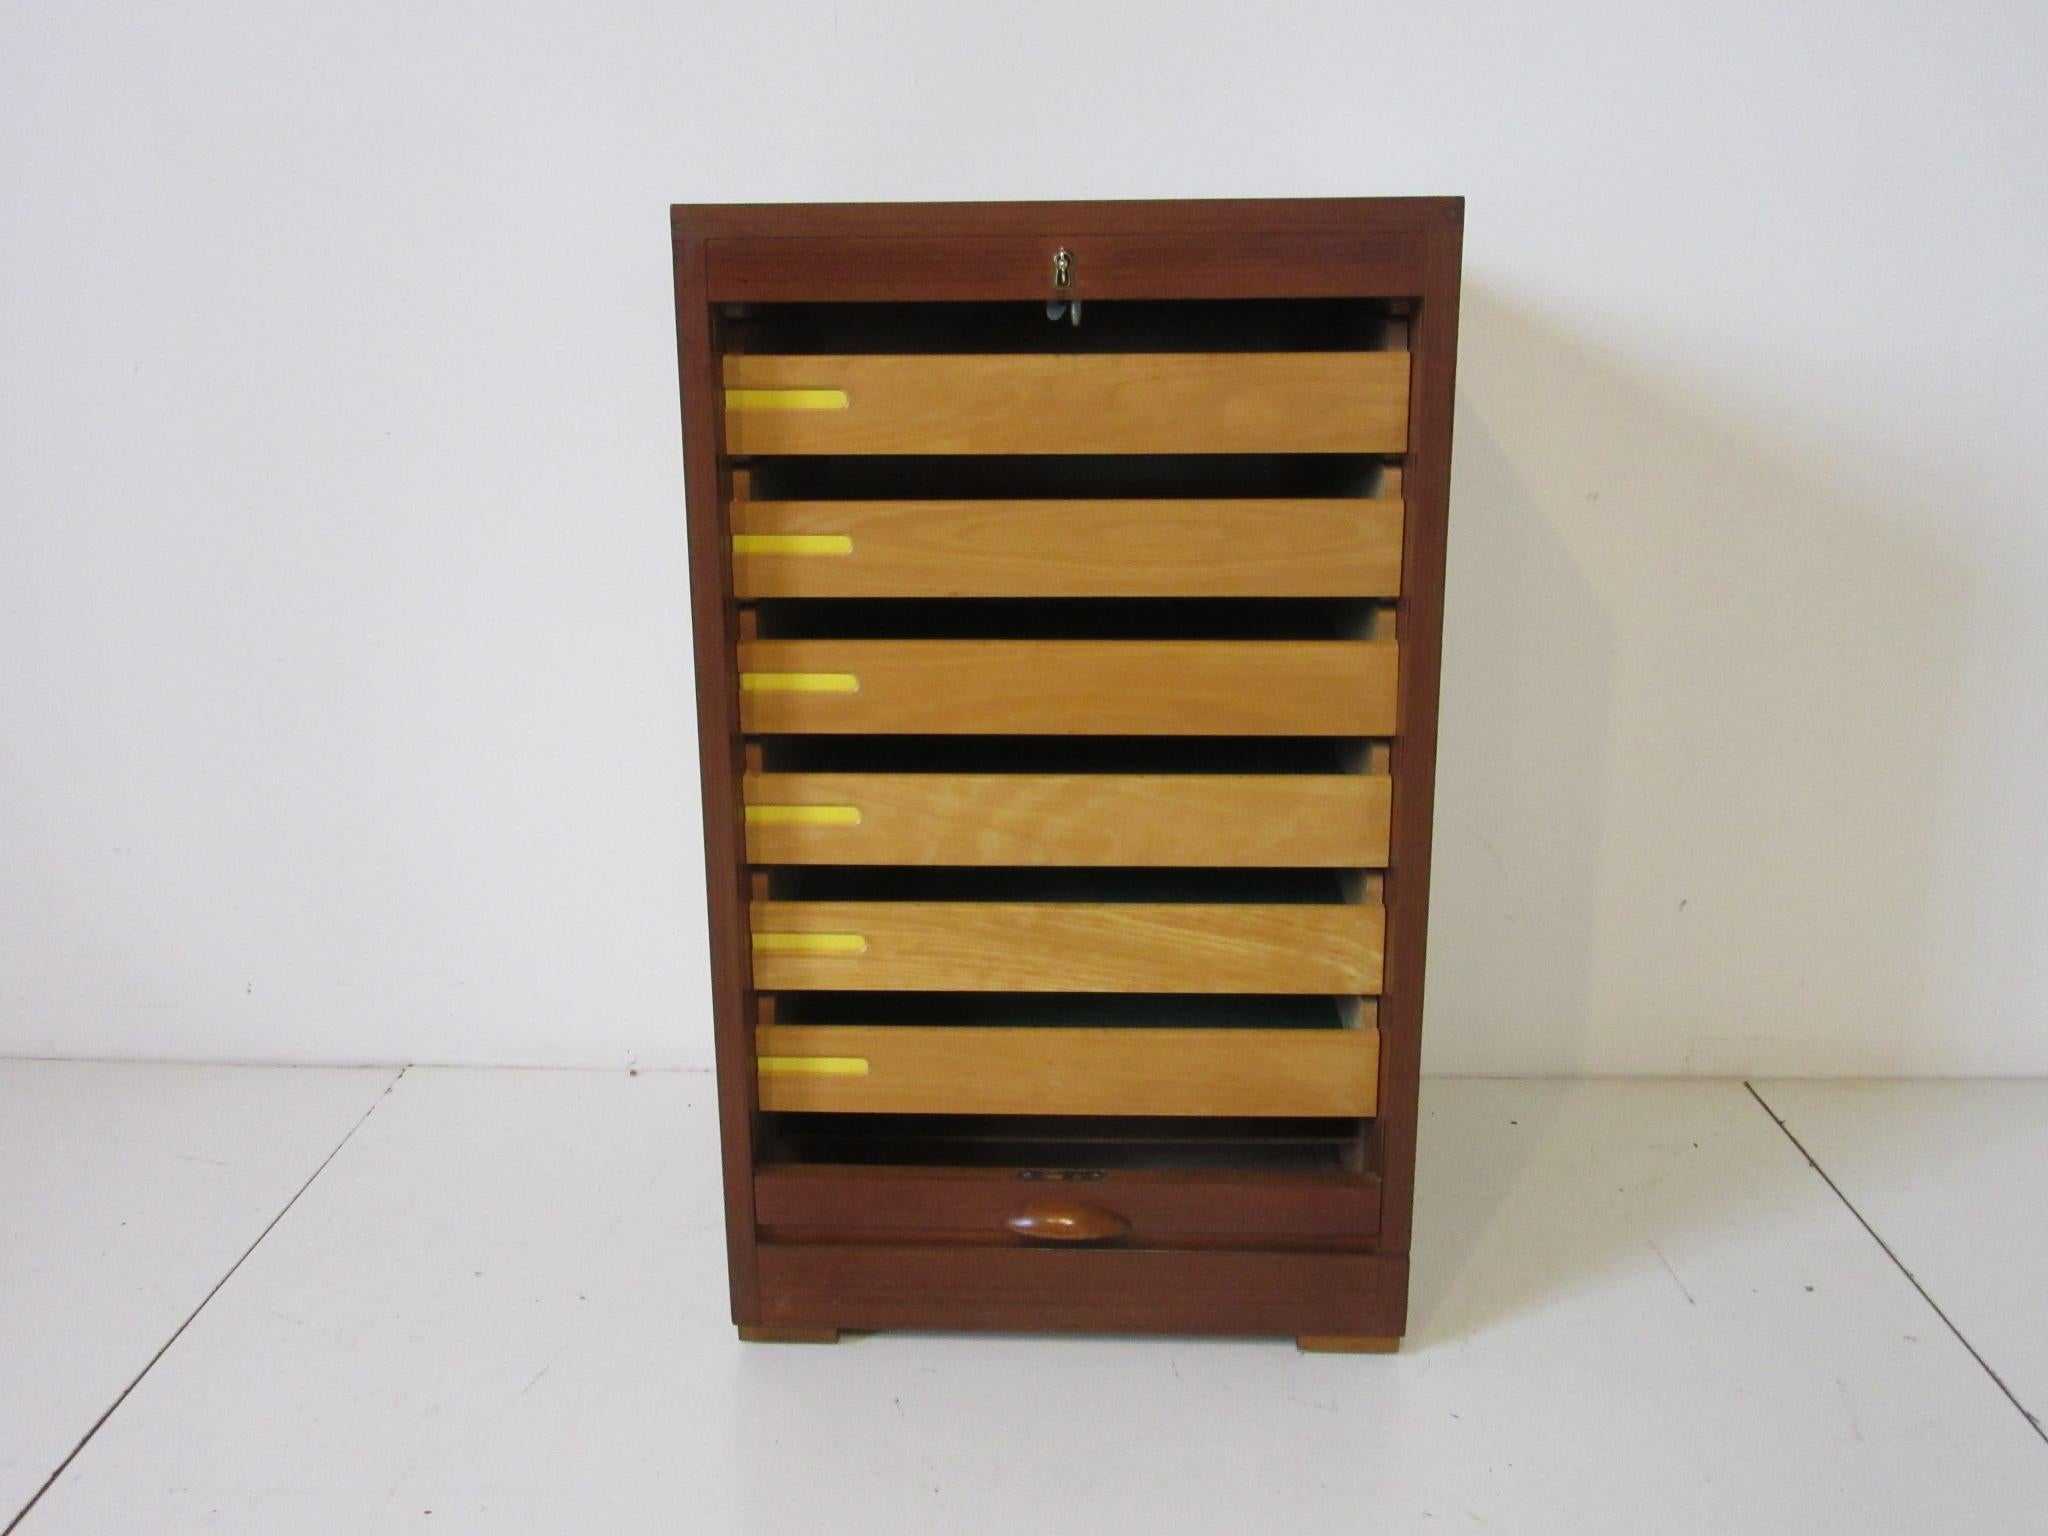 A Danish teak wood jewelry - watch chest / cabinet with roll down locking tabour door , brass key and six slide out drawers. Each drawer is felt lined to protect your Fine items and each drawer has a cutout for labels with yellow or orange for